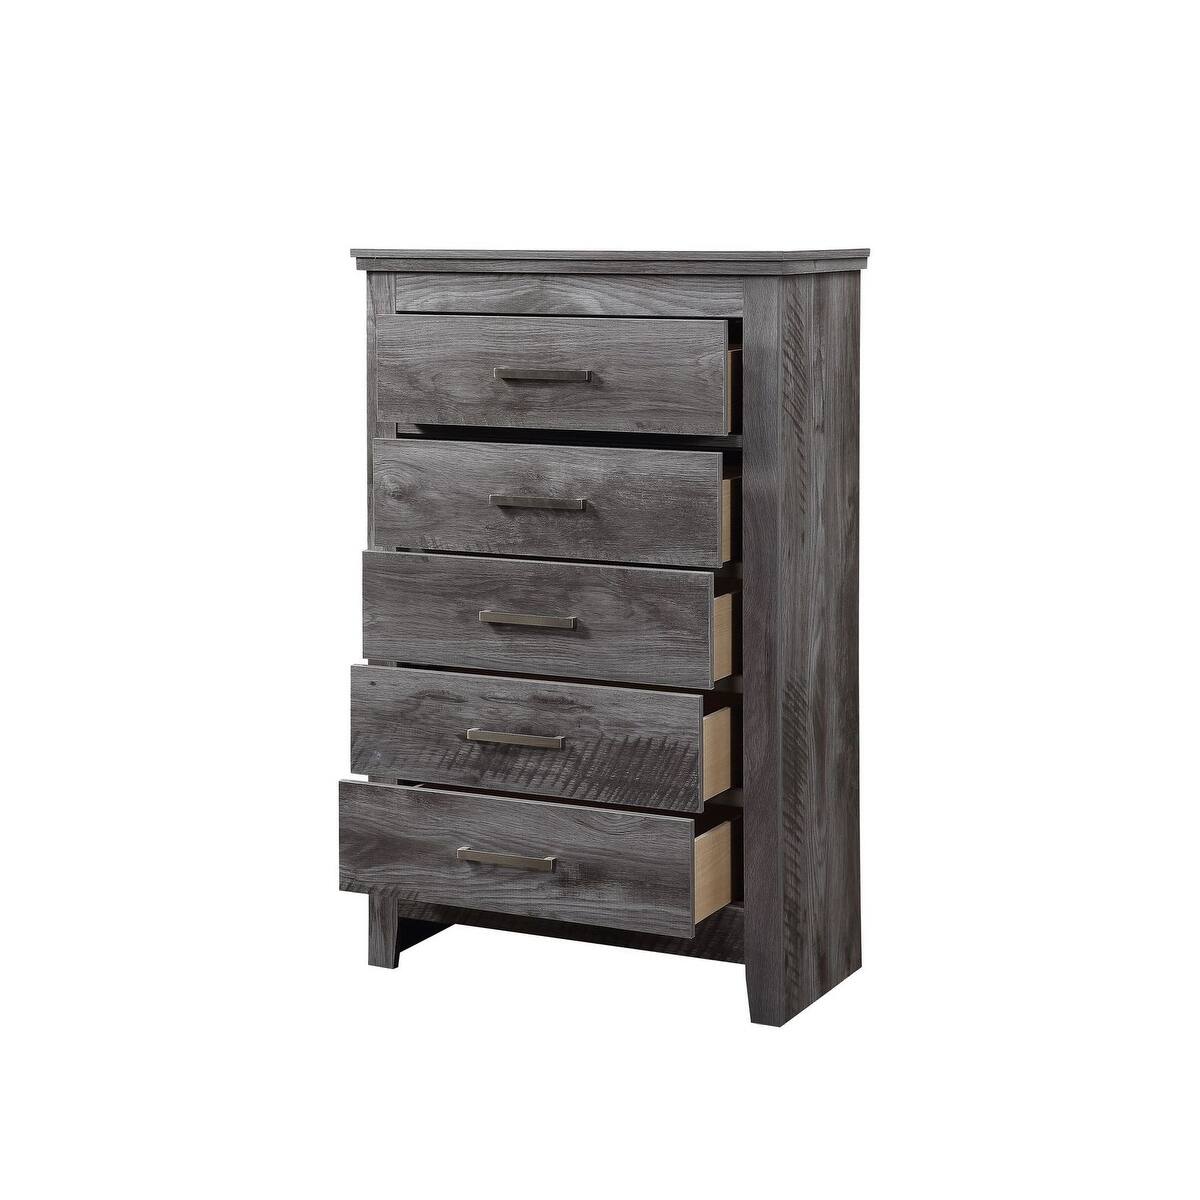 Global Pronex Wooden Chest with 5 Drawers in Rustic Gray Oak